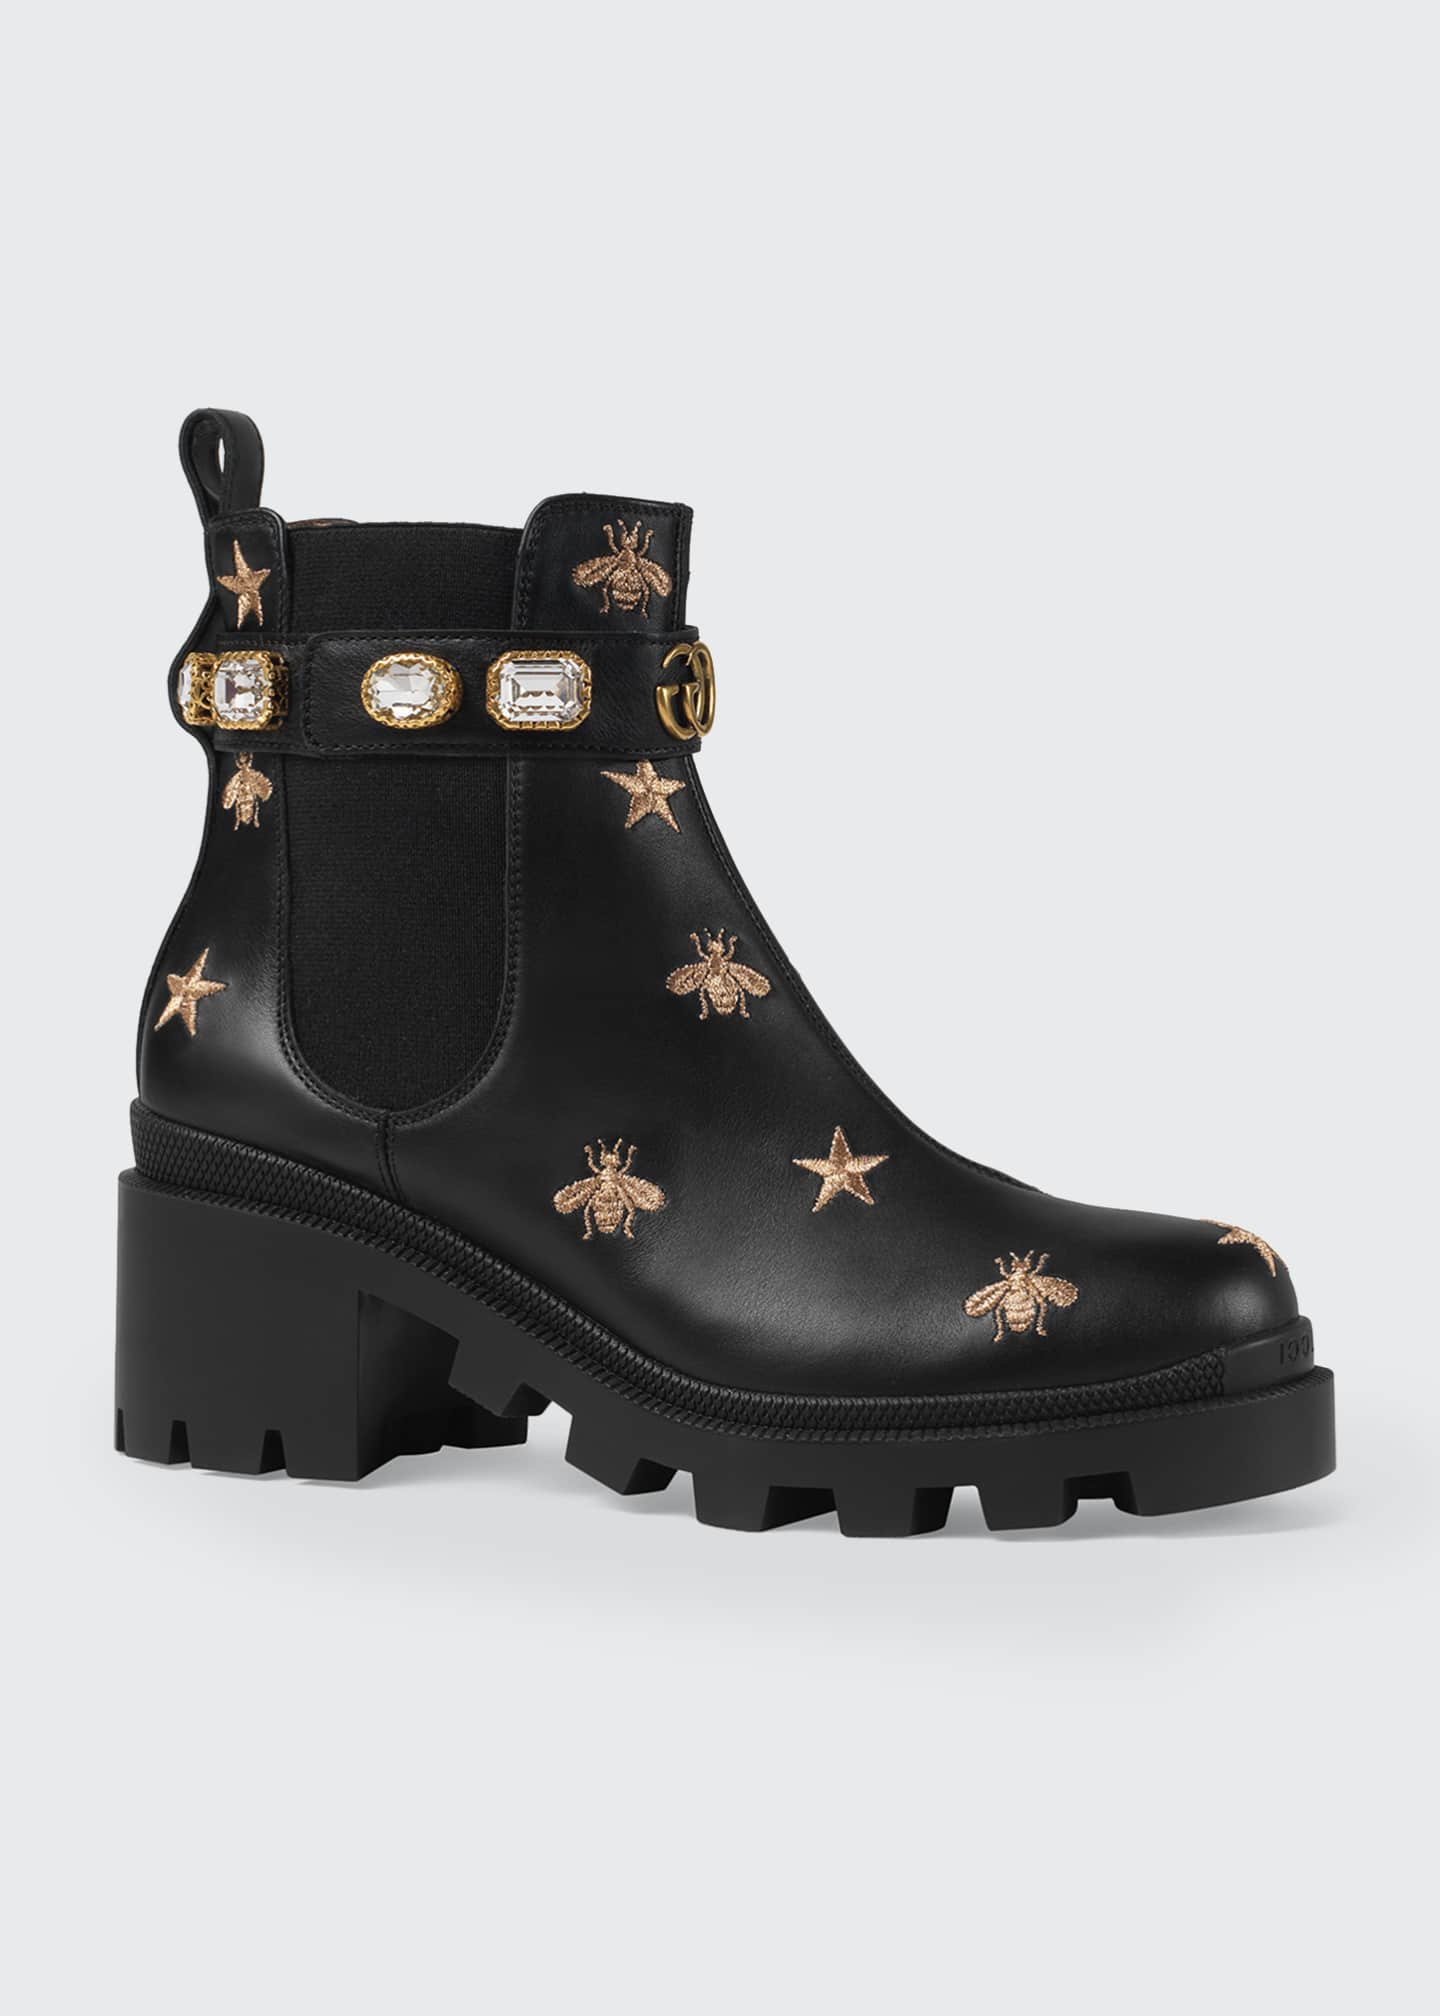 gucci black boots with bees, OFF 73%,Buy!